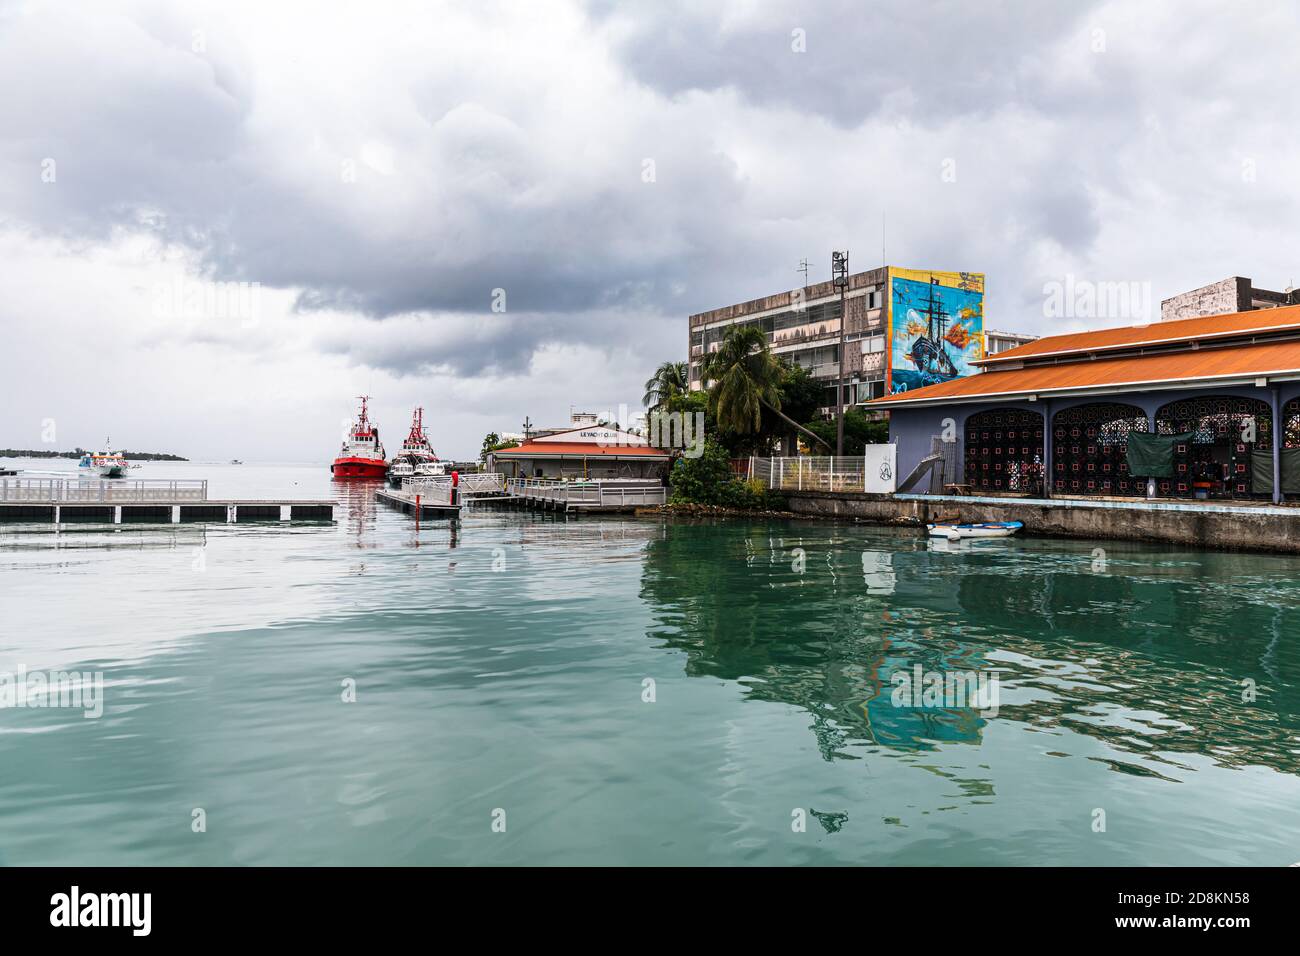 5 JAN 2020 - Pointe-a-Pitre, Guadeloupe, FWI - The harbor Stock Photo